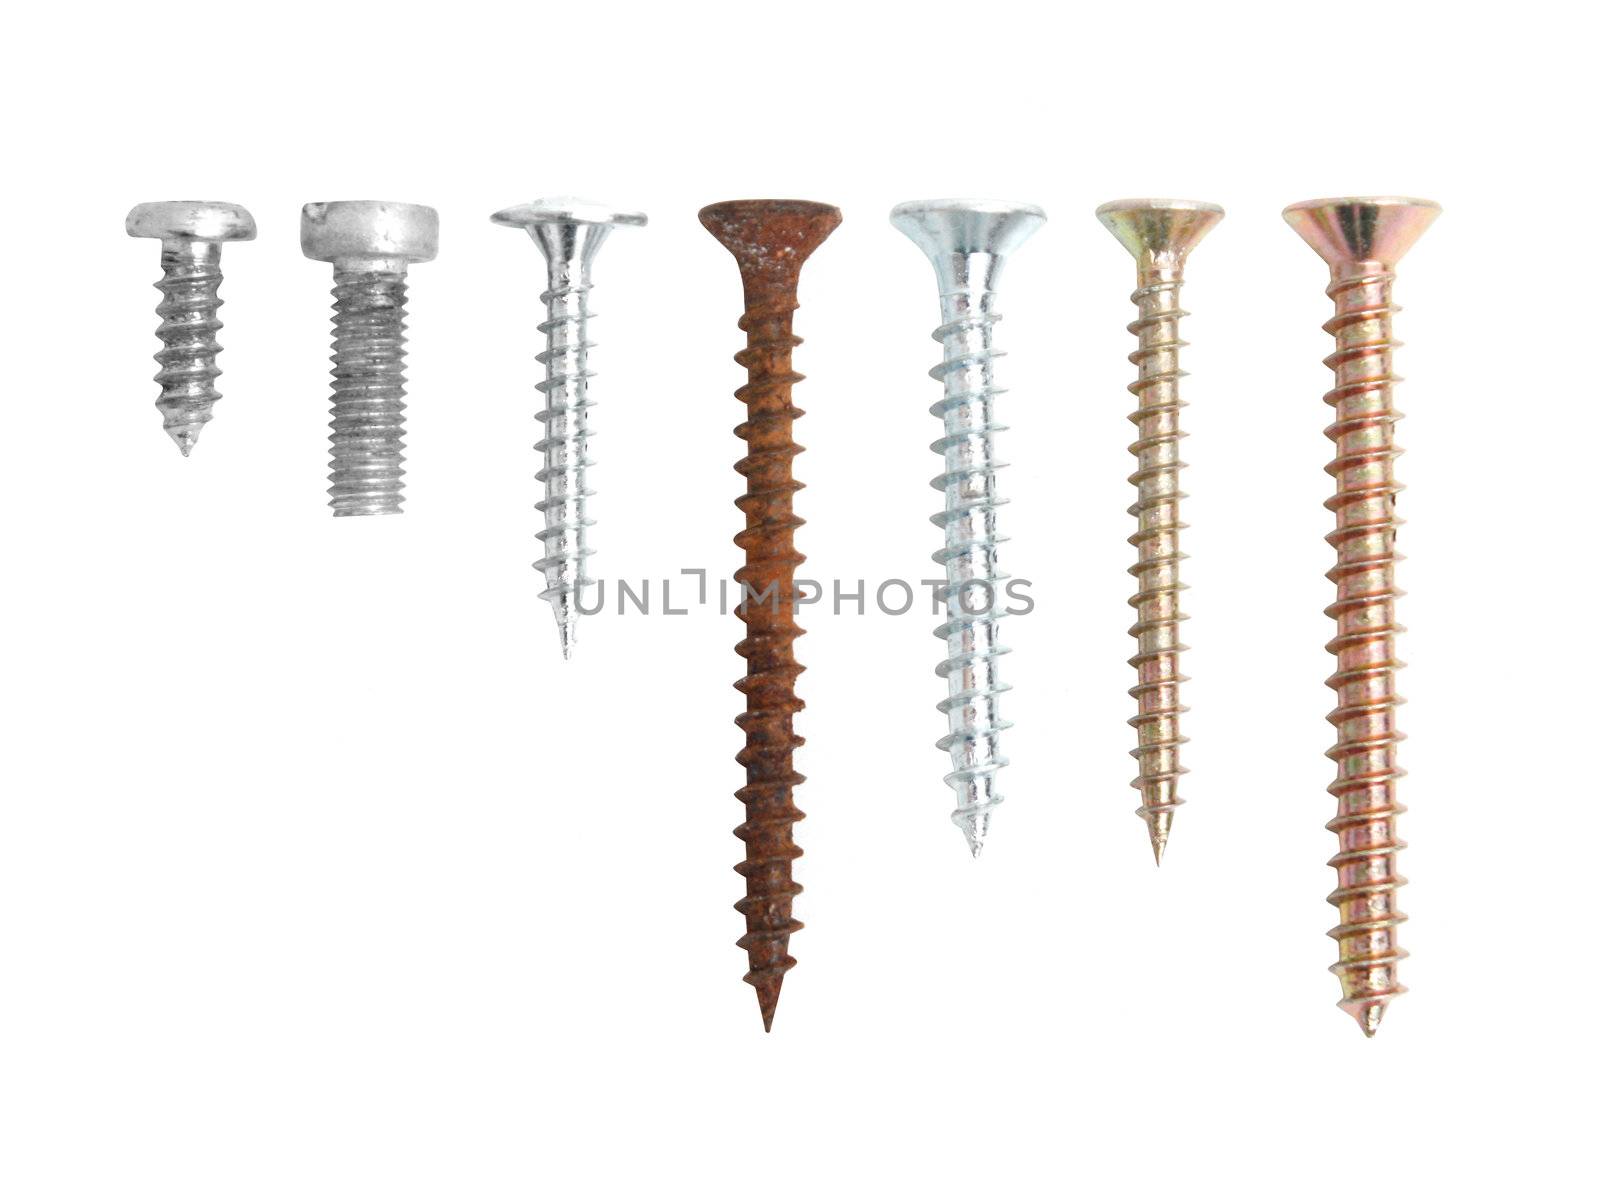 Screws isolated on white by leeser